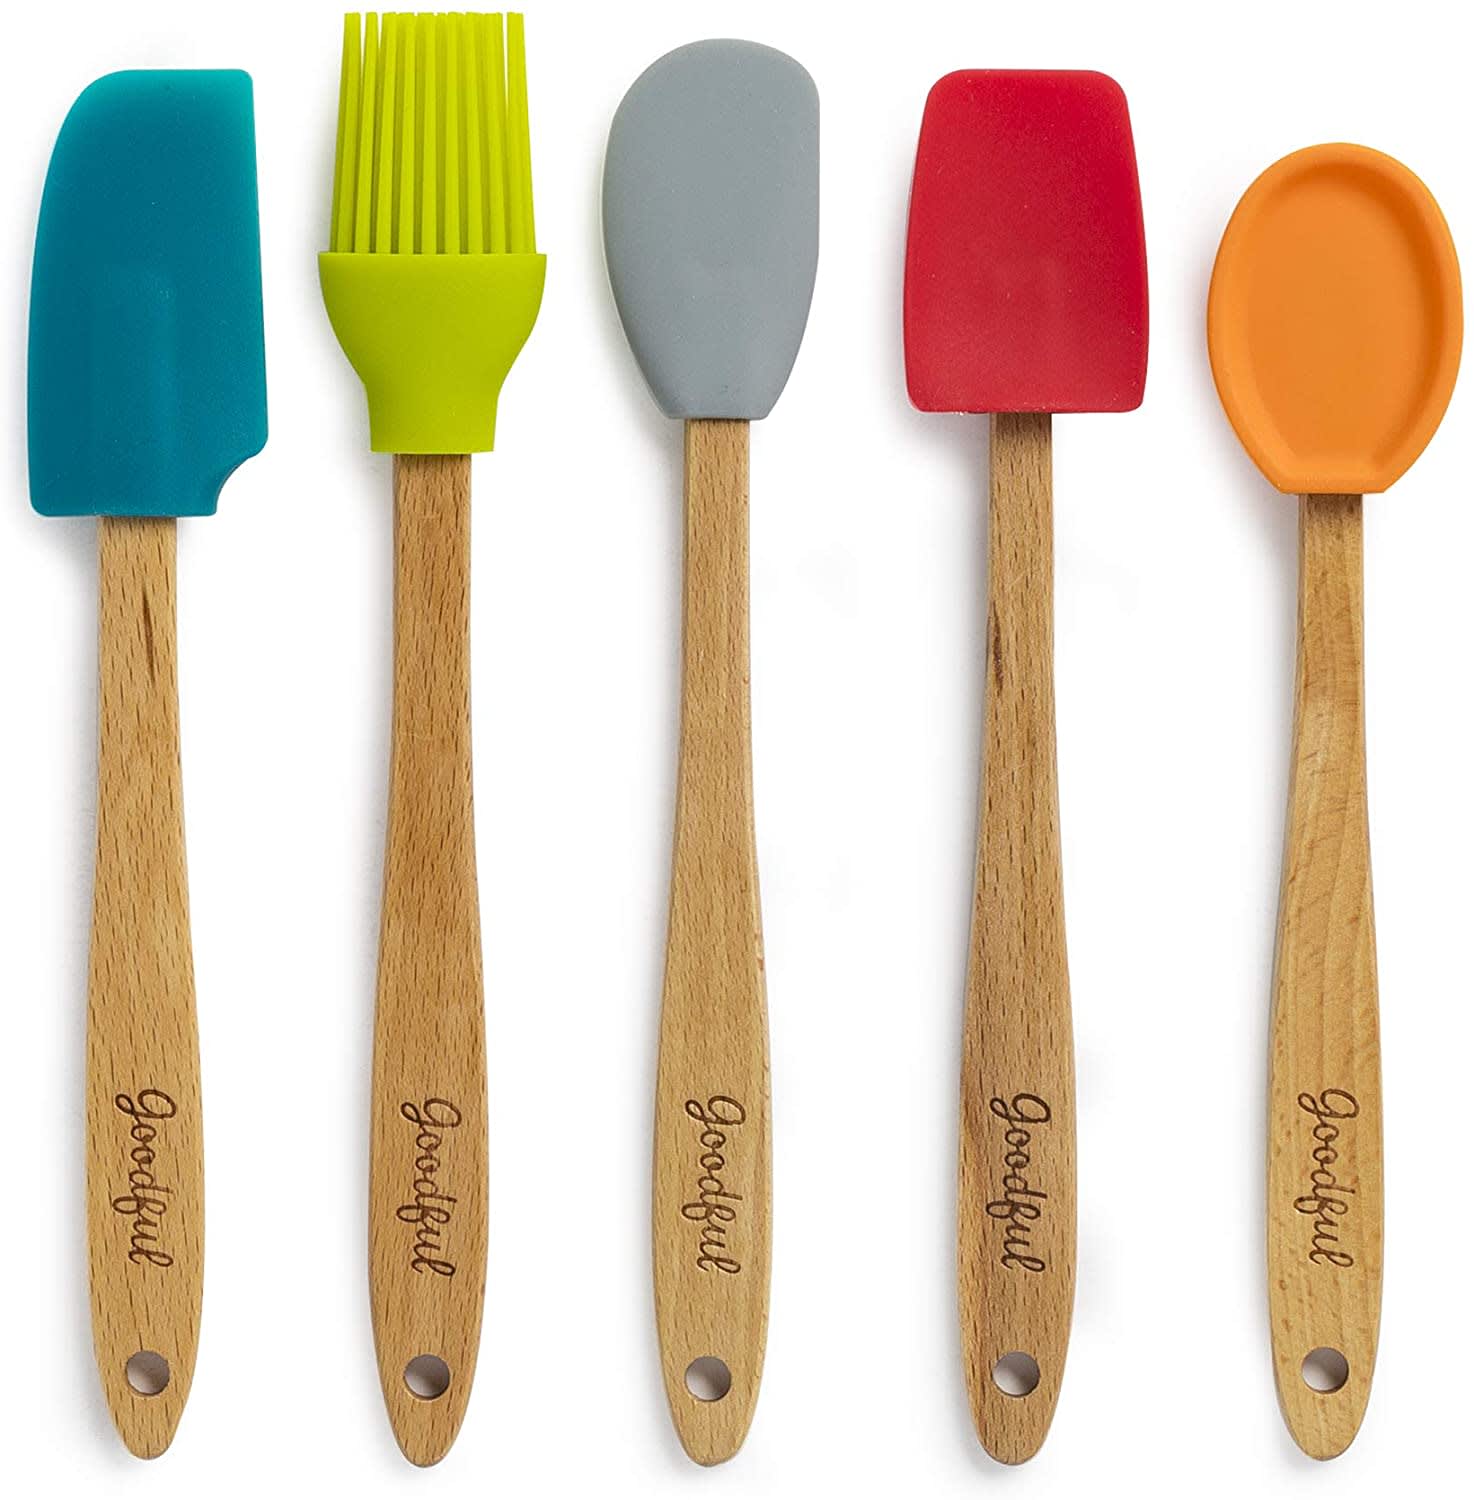 http://cdn.apartmenttherapy.info/image/upload/v1600696881/gen-workflow/product-database/Goodful-Silicone-and-Beechwood-Mini-Kitchen-Utensil-Set.jpg